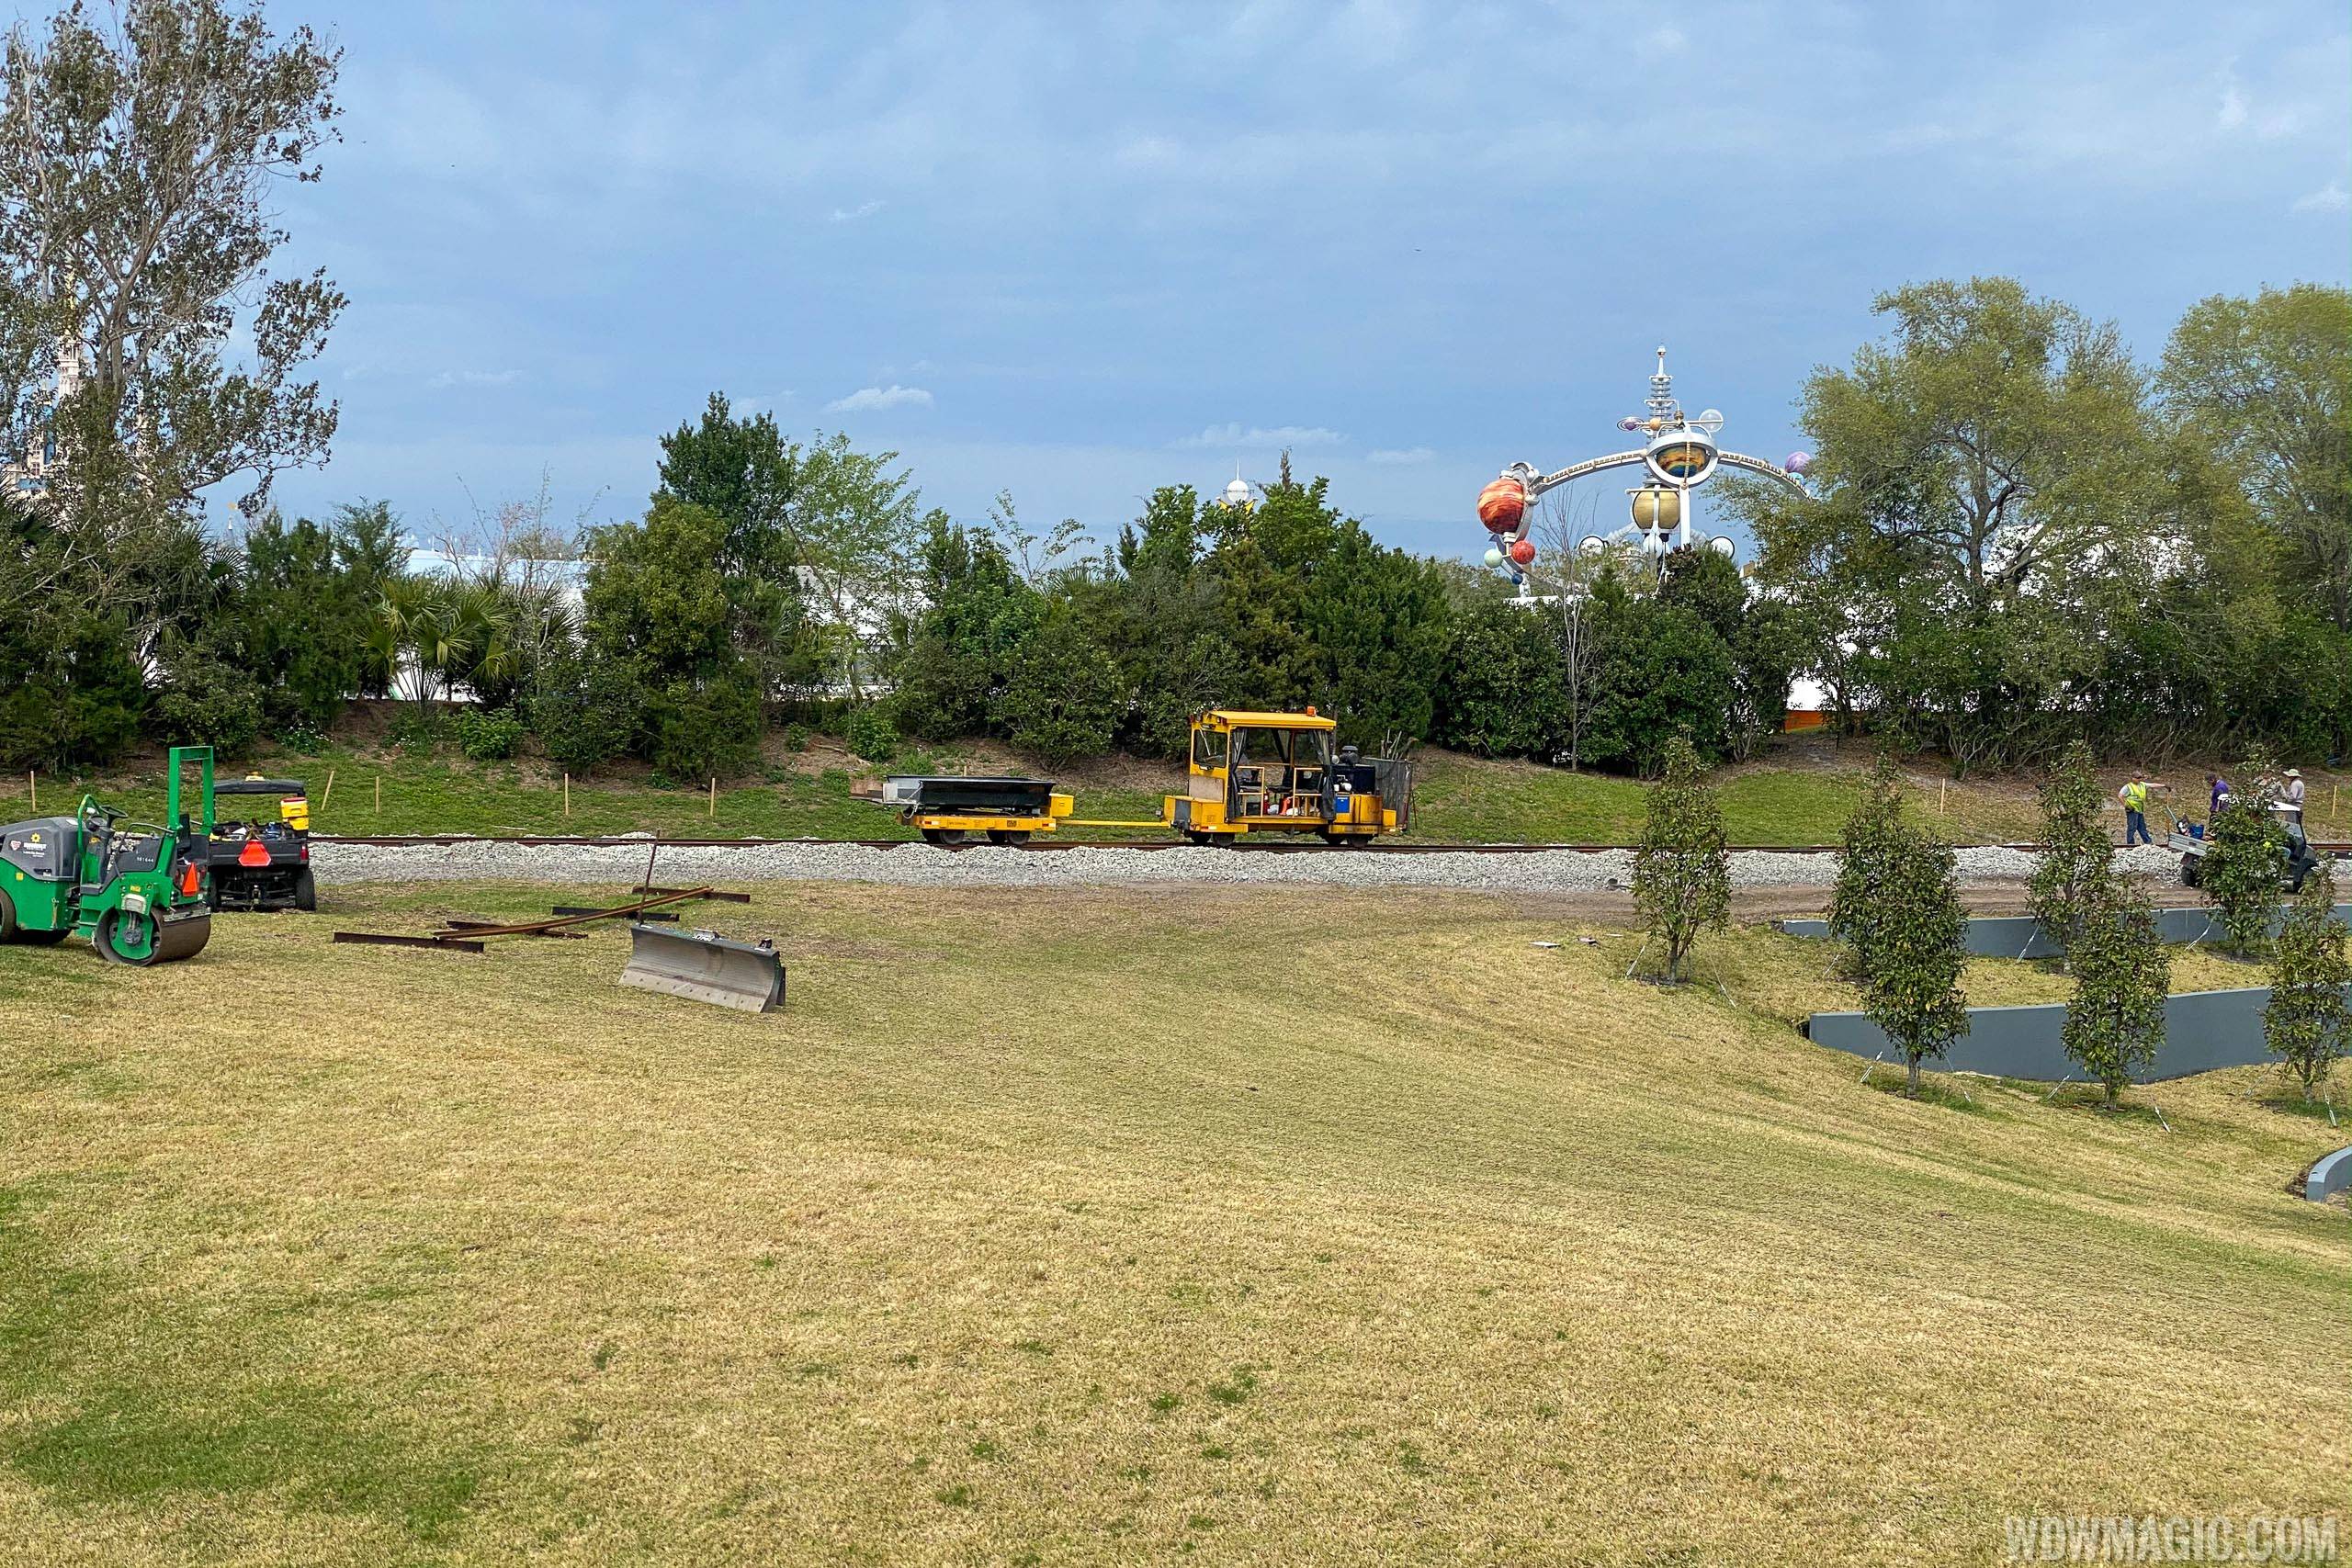 Laying replacement track at the Walt Disney World Railway